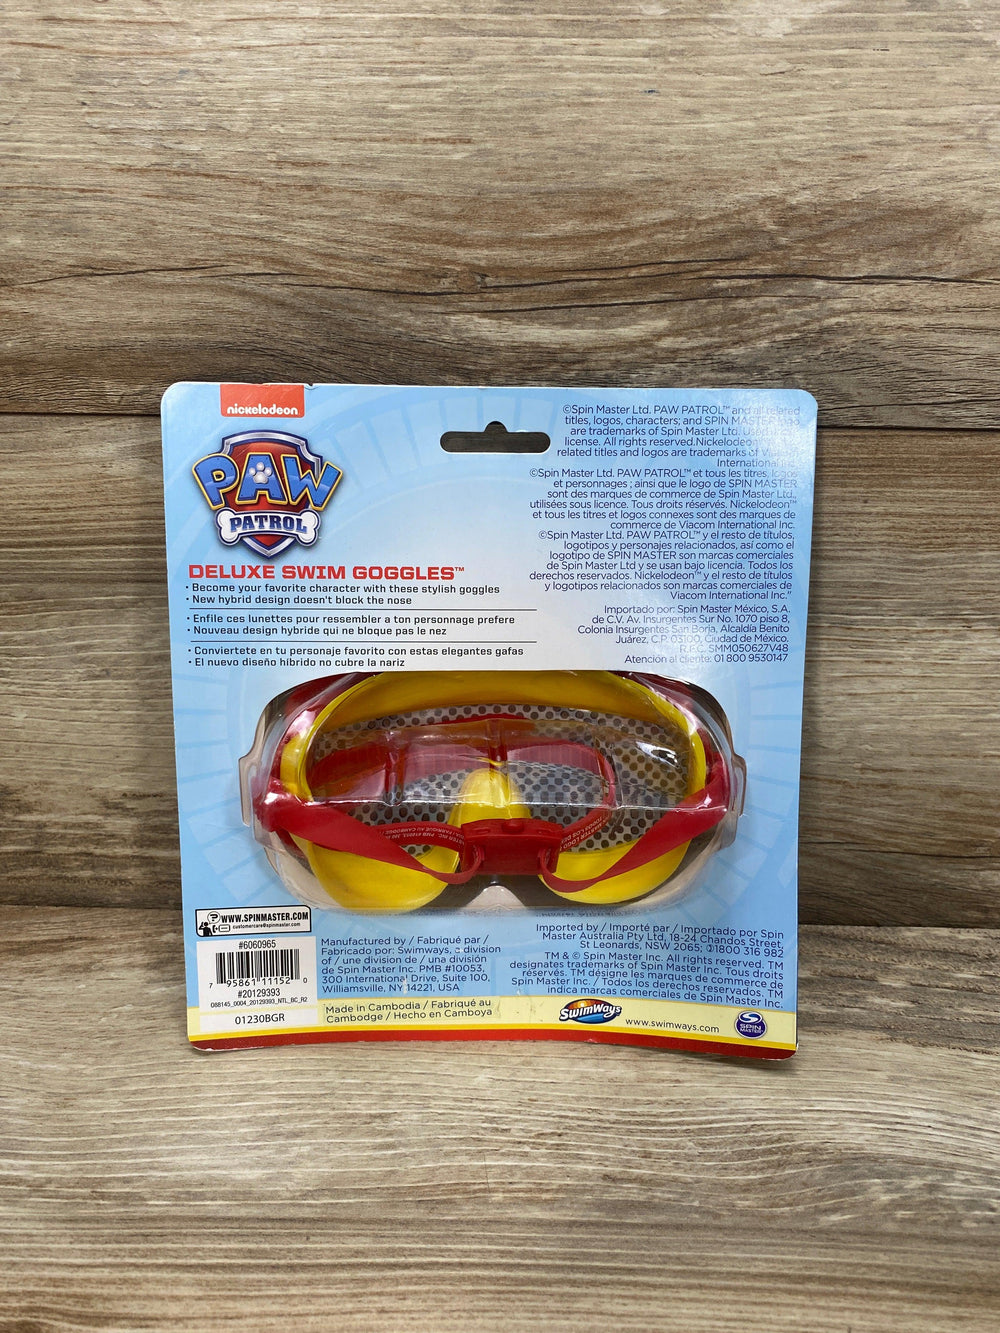 NEW Swimways Paw Patrol Marshall Deluxe Swim Goggles - Me 'n Mommy To Be